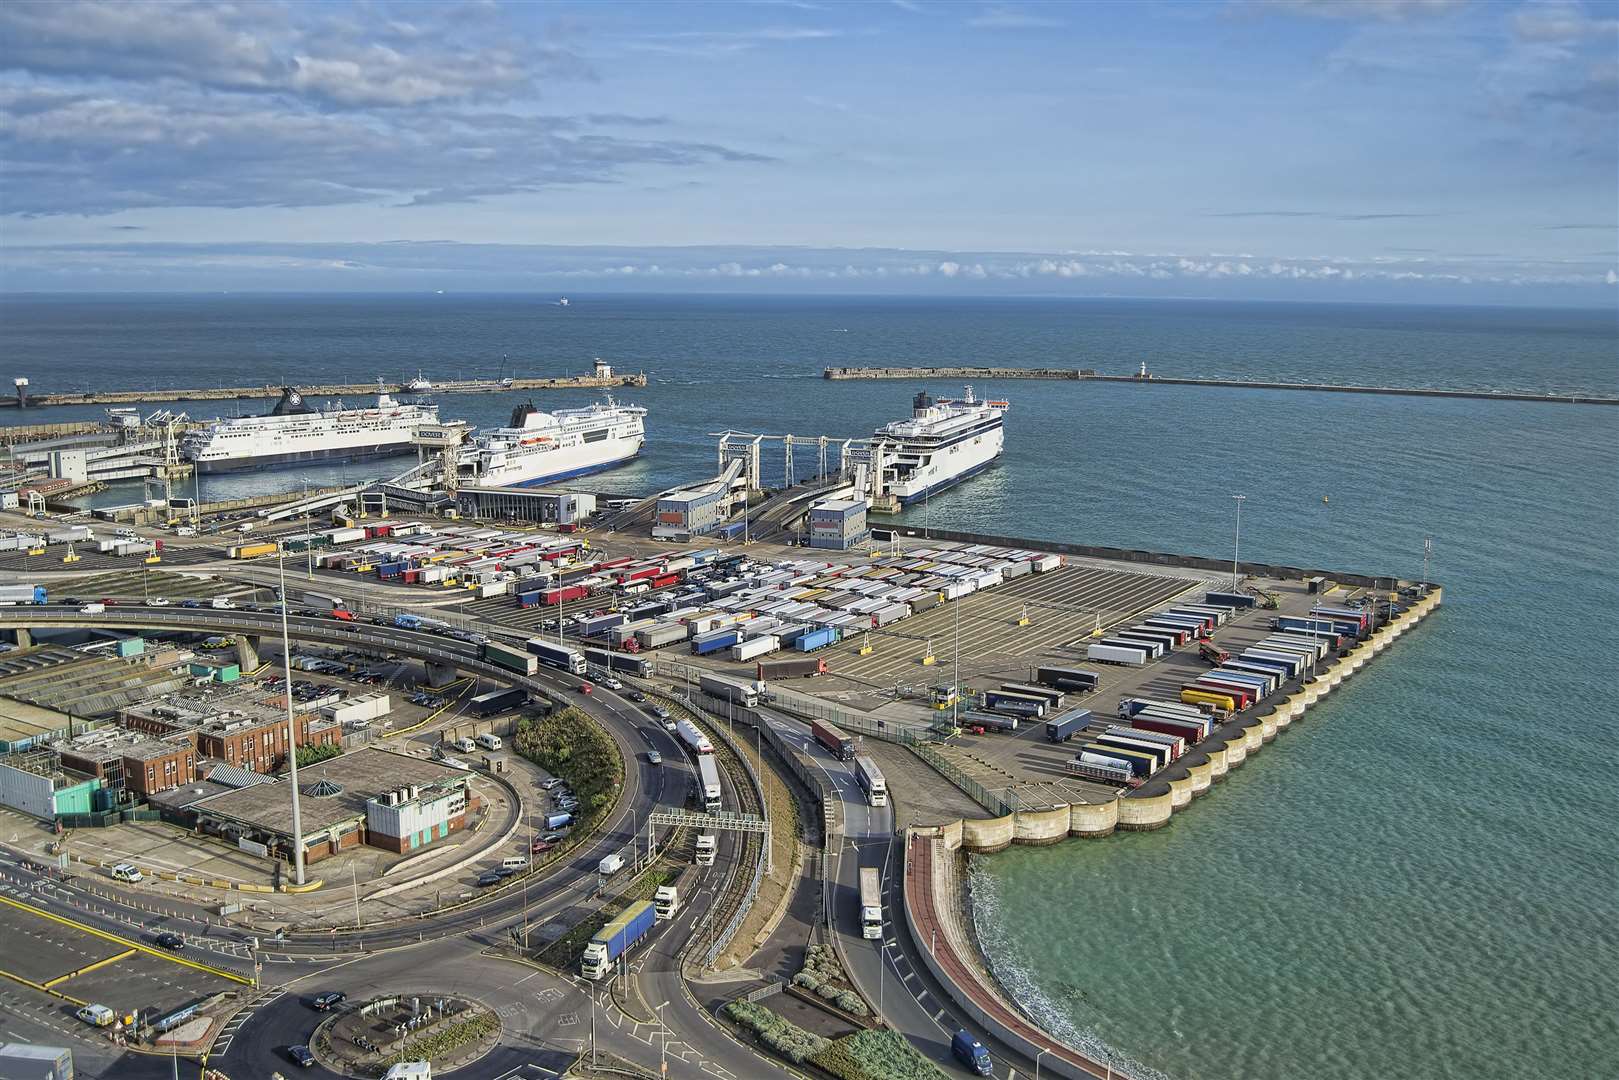 View of the Port of Dover